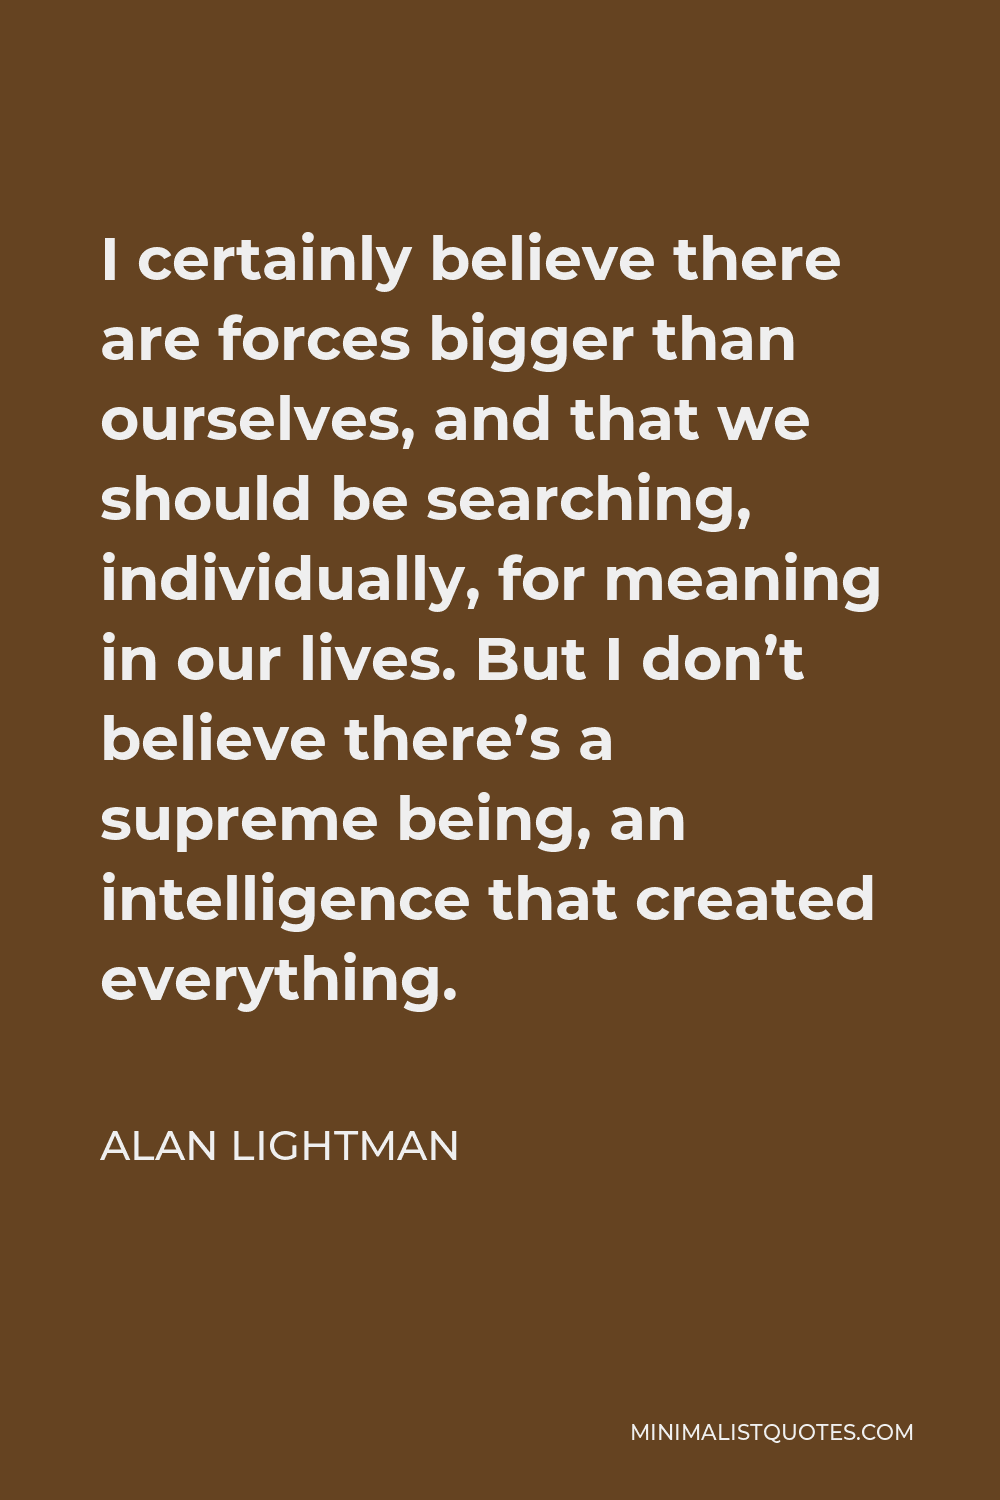 Alan Lightman Quote - I certainly believe there are forces bigger than ourselves, and that we should be searching, individually, for meaning in our lives. But I don’t believe there’s a supreme being, an intelligence that created everything.